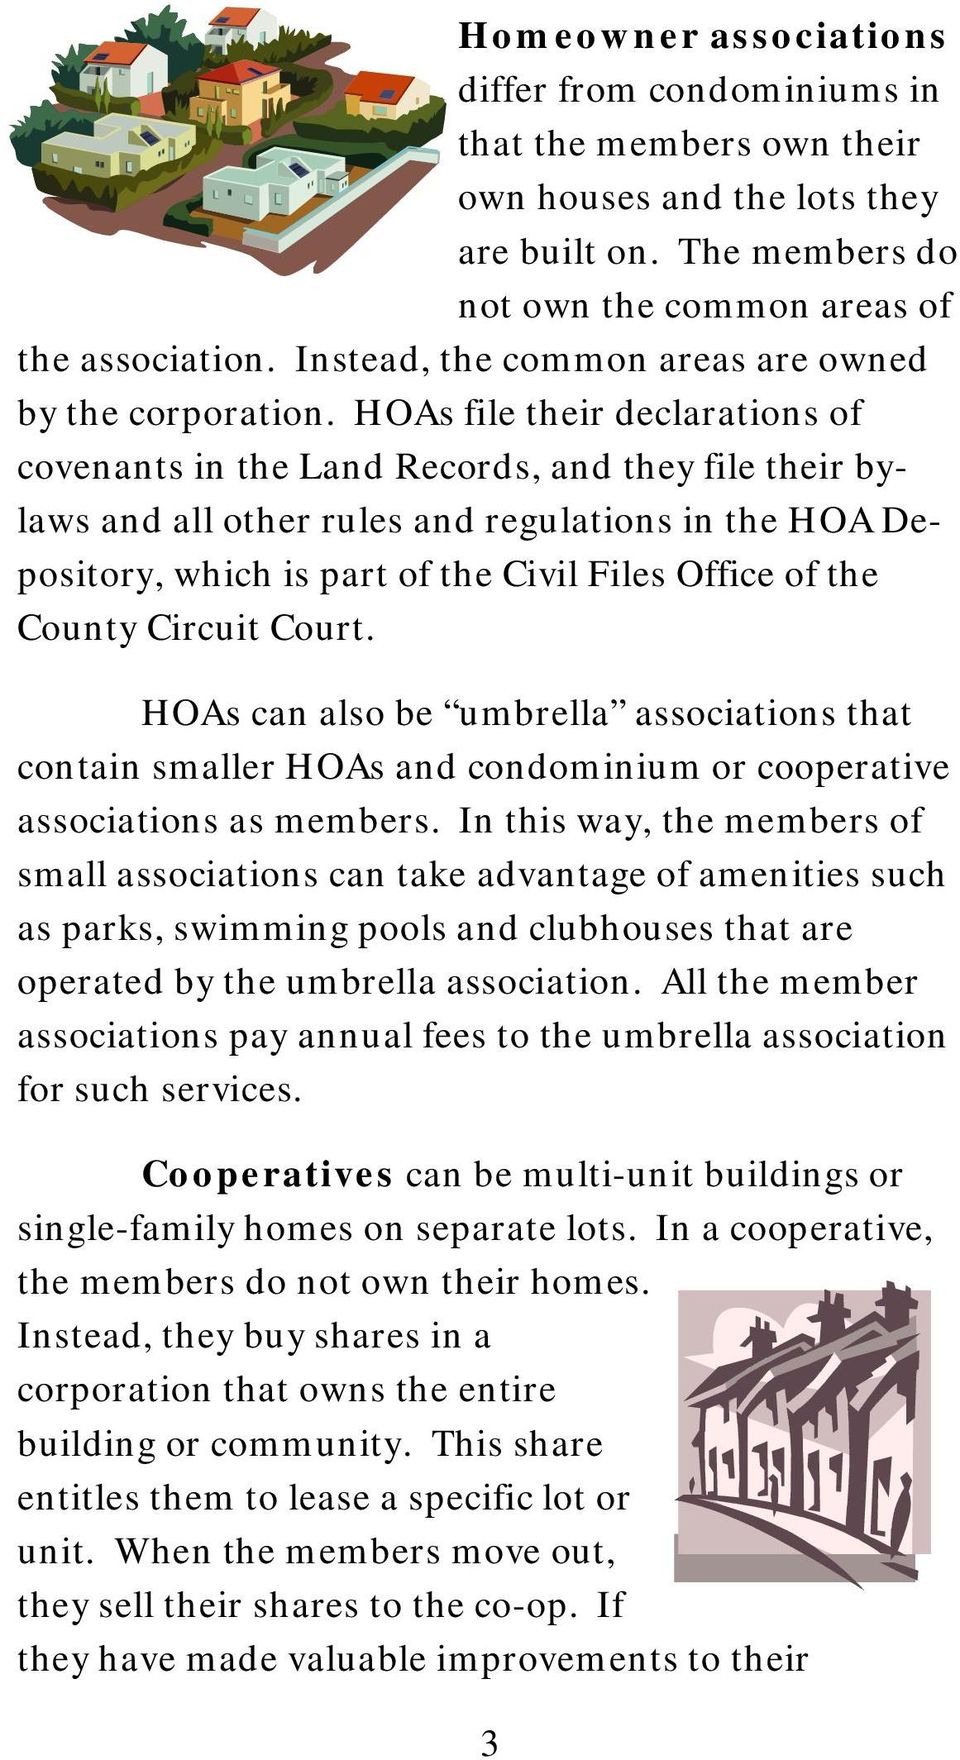 HOAs file their declarations of covenants in the Land Records, and they file their bylaws and all other rules and regulations in the HOA Depository, which is part of the Civil Files Office of the